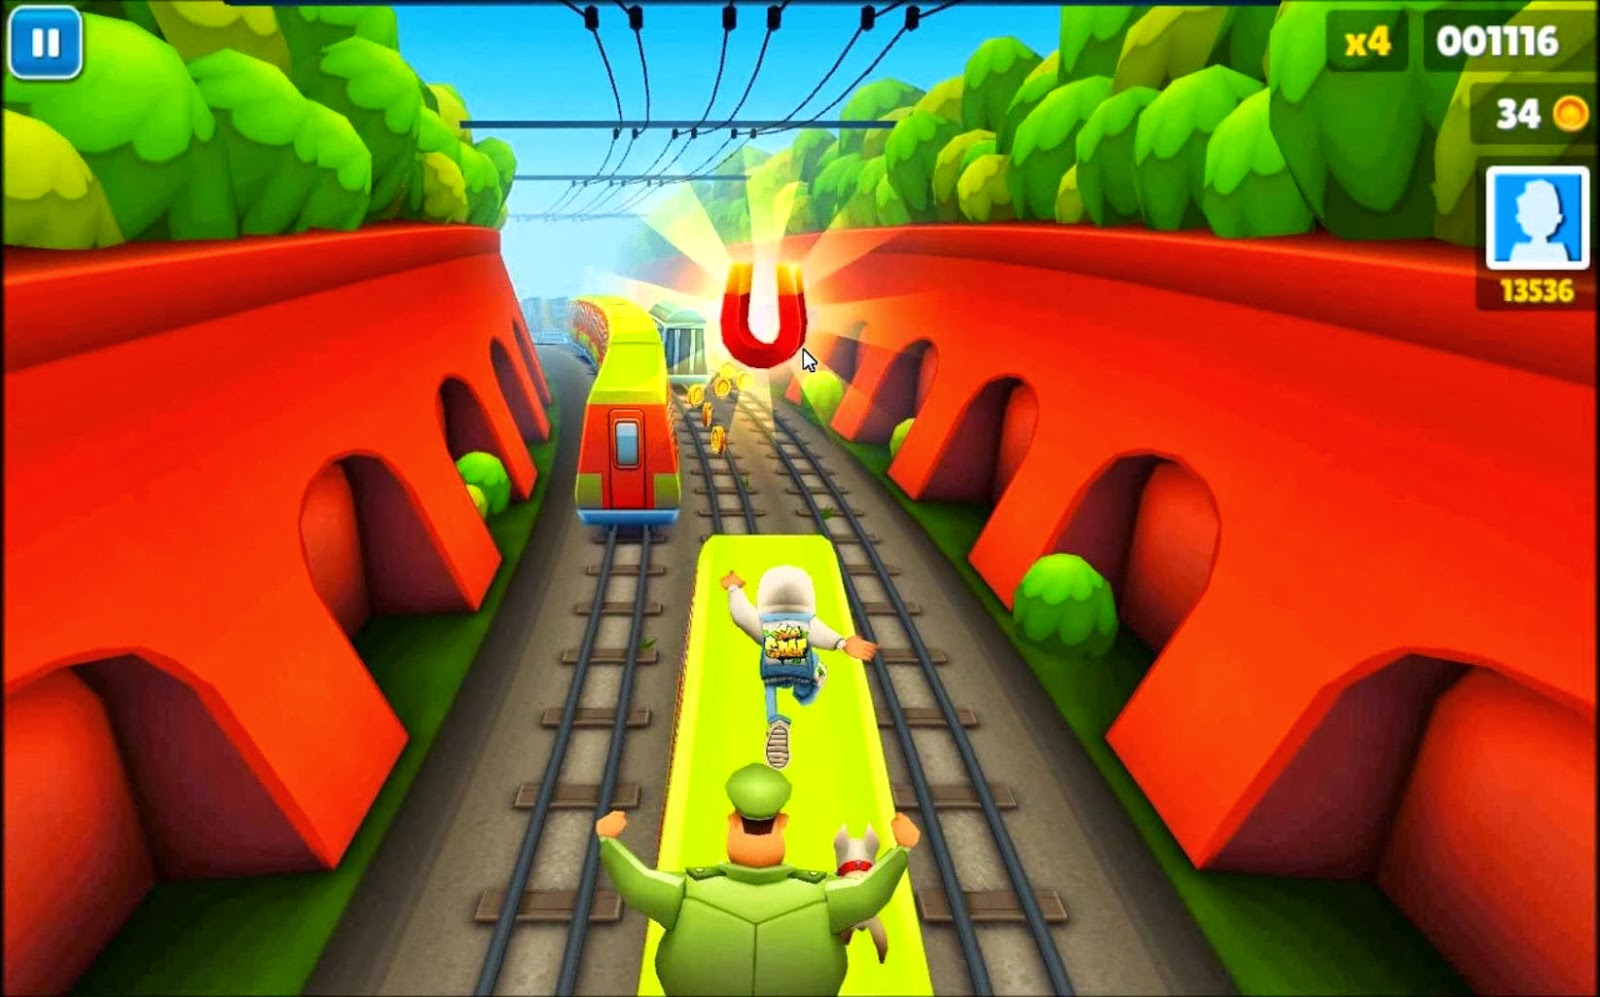 Subway Surfers Rio Free Game download - Full crack game PC